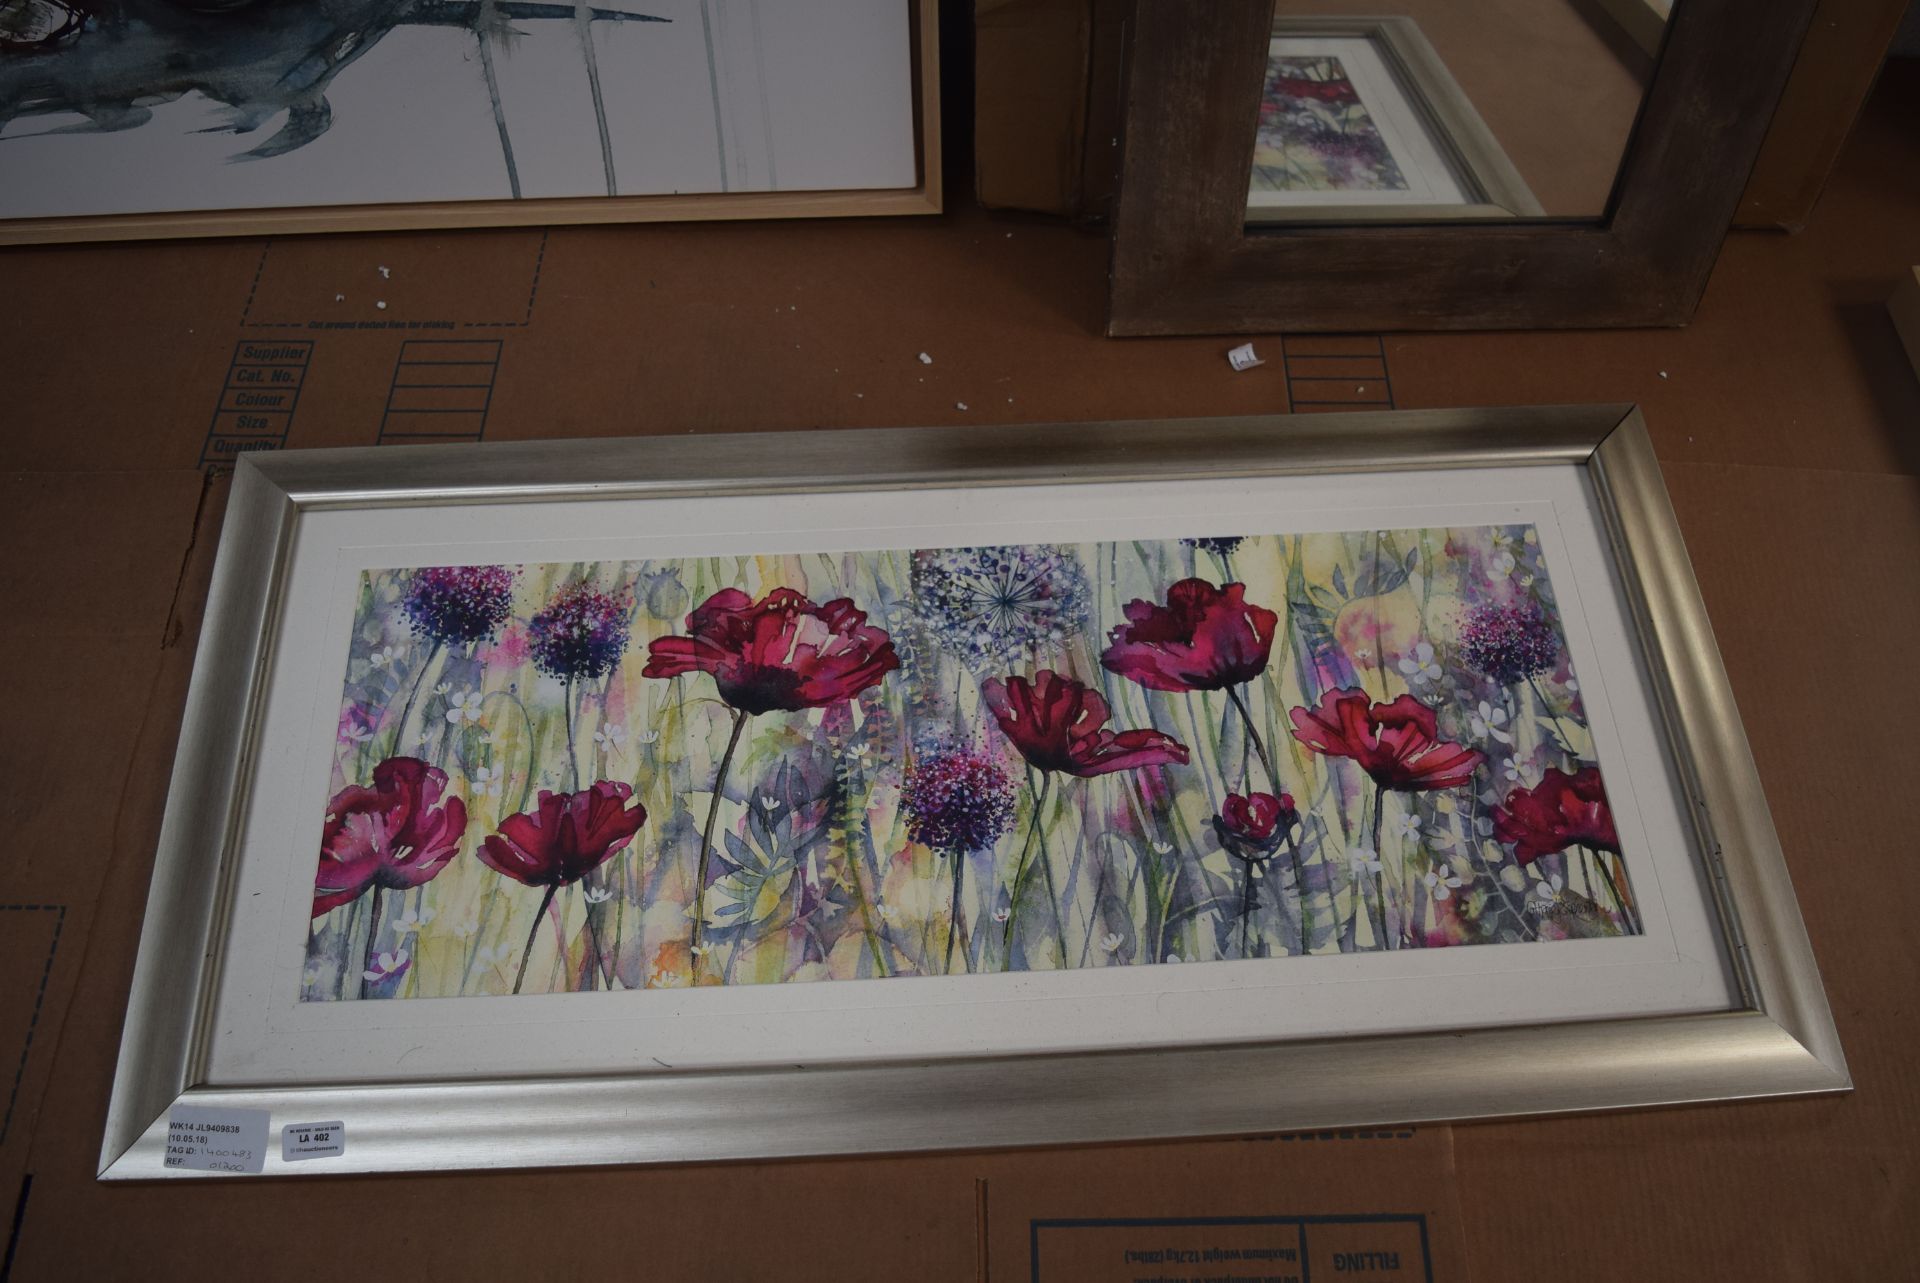 1 X FLORAL PRINT IN SILVER FRAME RRP £120 10.05.18 1400483